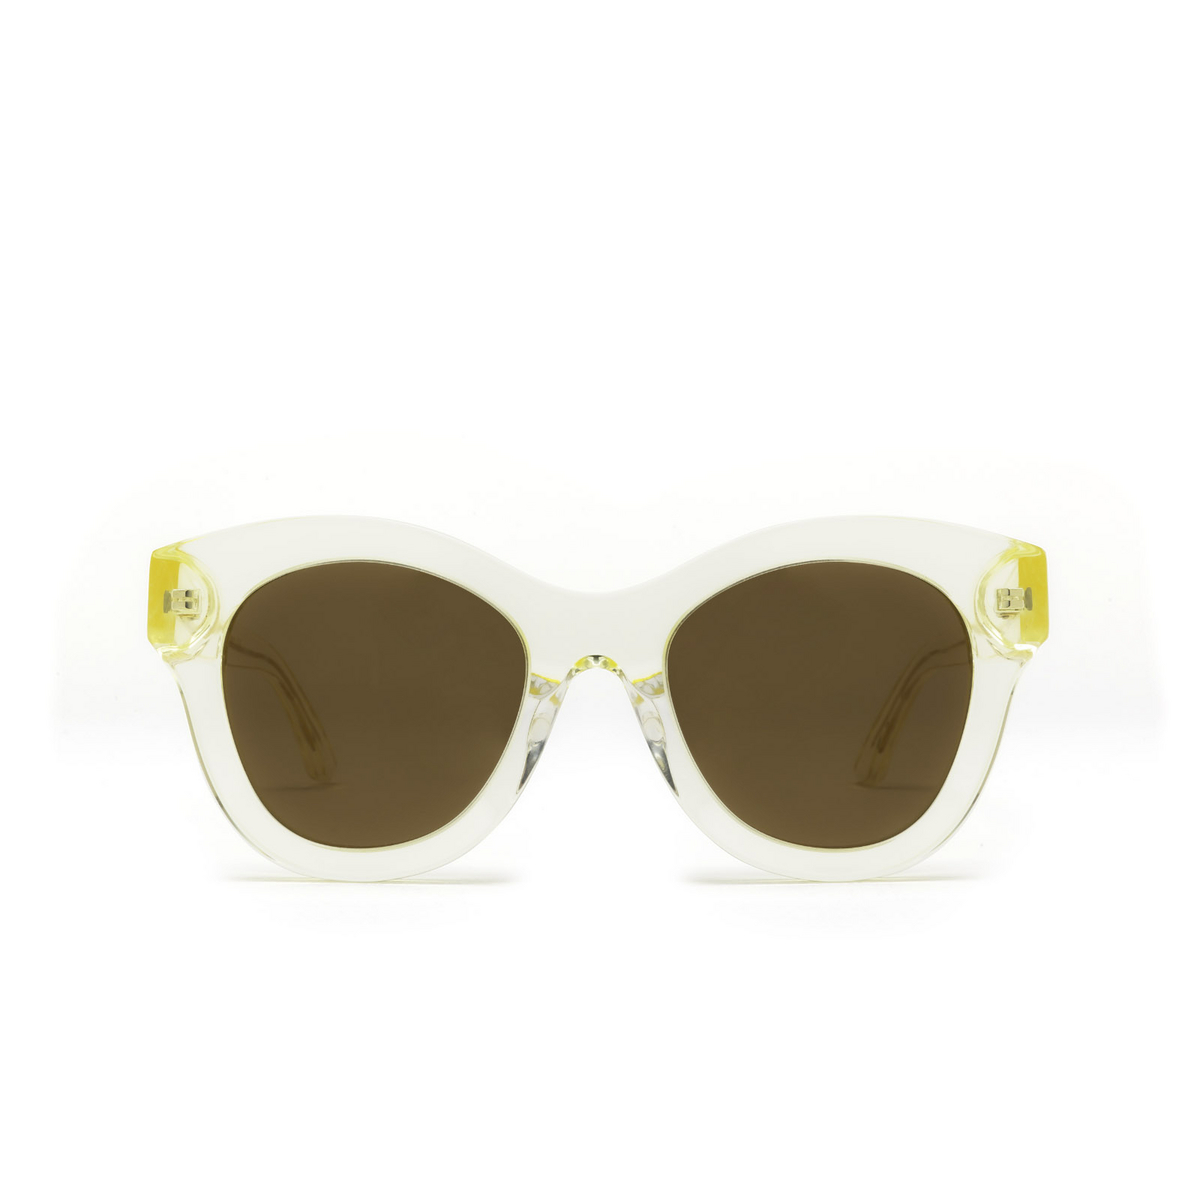 Huma® Butterfly Sunglasses: Cami color Champagne 02 - front view.